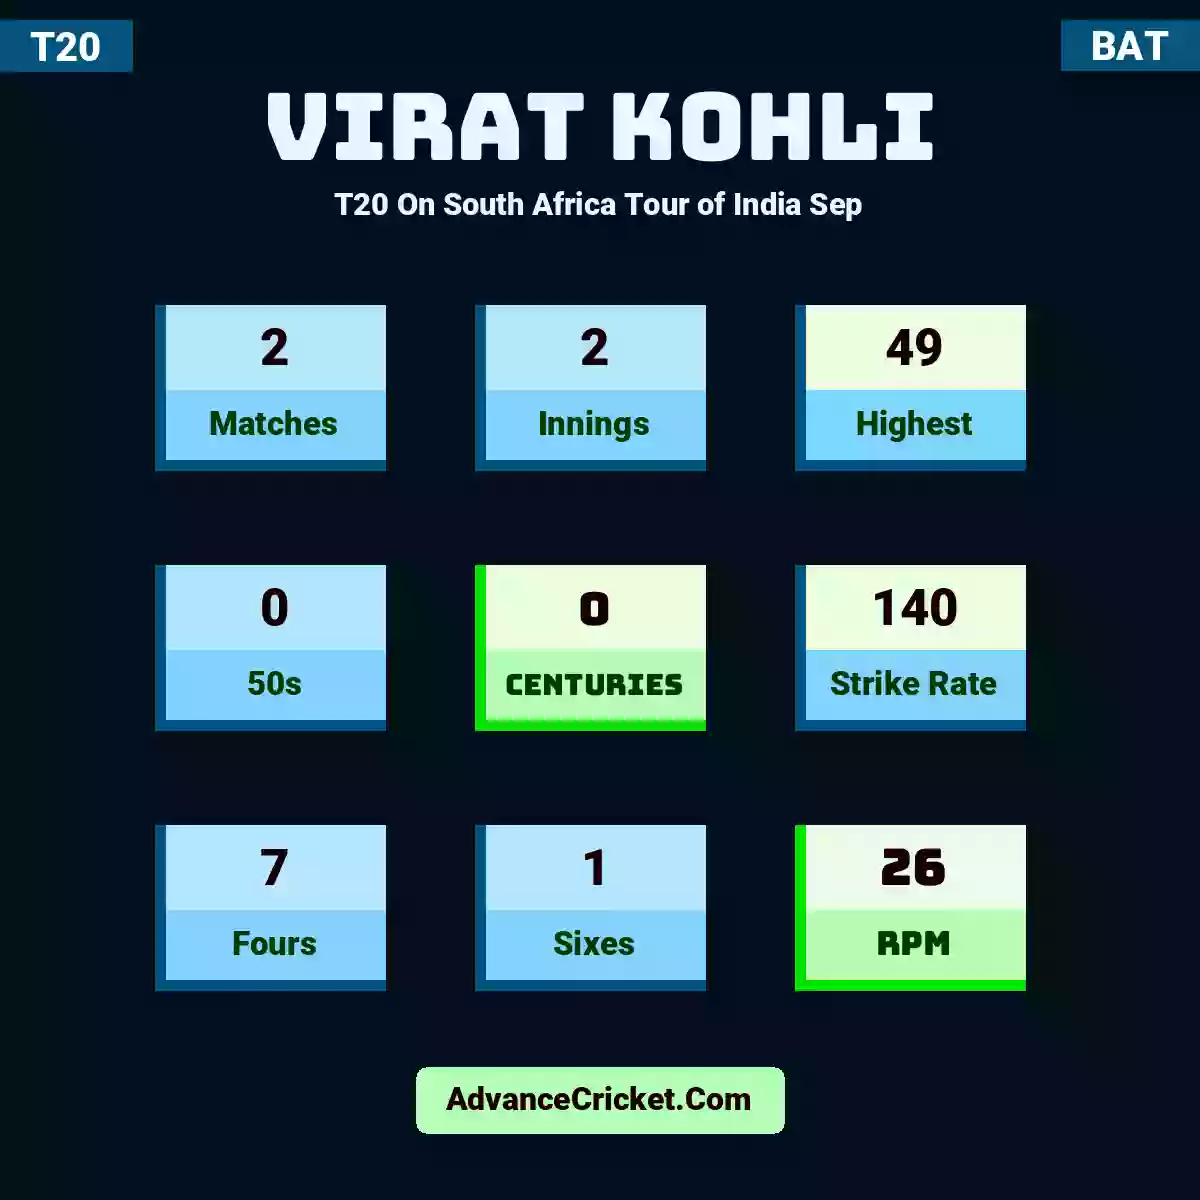 Virat Kohli T20  On South Africa Tour of India Sep, Virat Kohli played 2 matches, scored 49 runs as highest, 0 half-centuries, and 0 centuries, with a strike rate of 140. V.Kohli hit 7 fours and 1 sixes, with an RPM of 26.